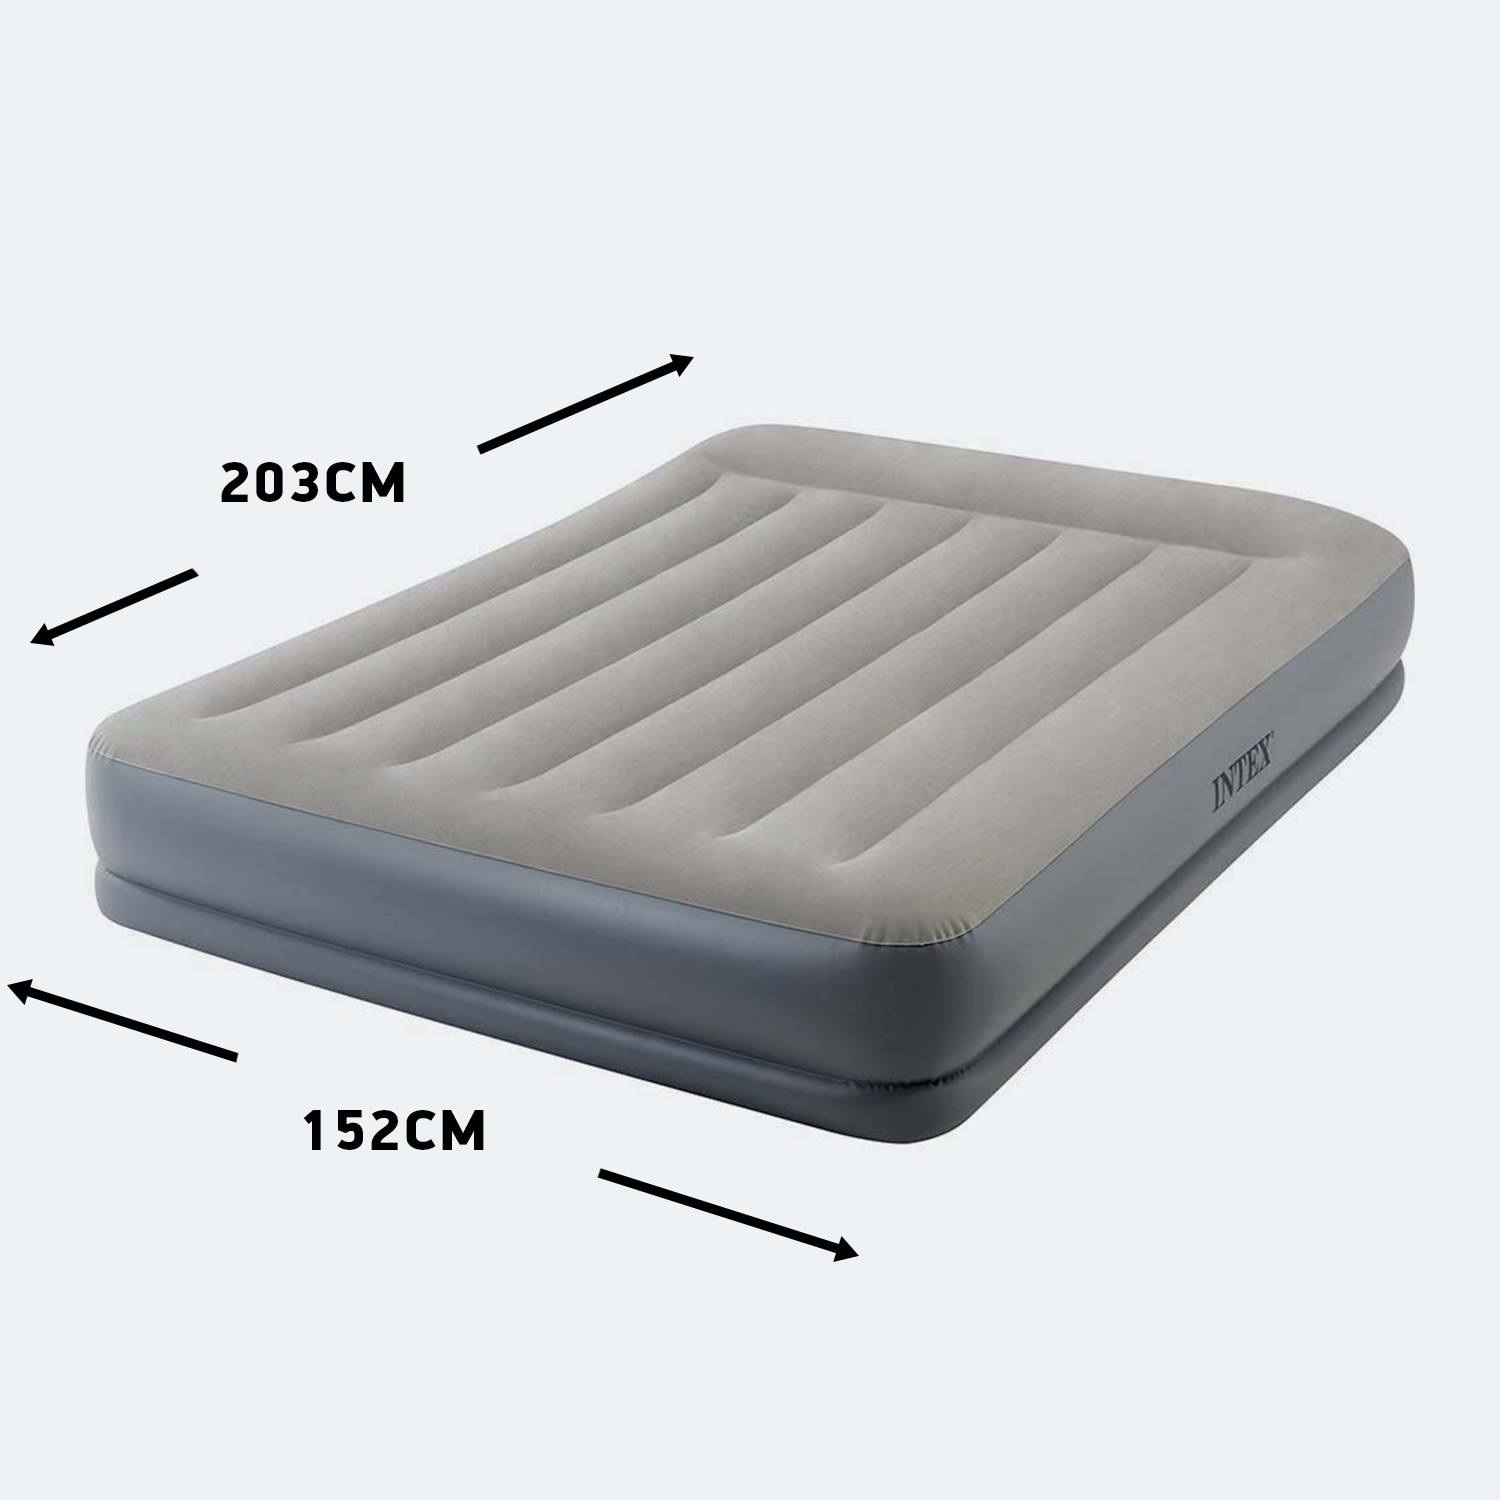 INTEX Pillow Rest Mid-Rise Double Airbed Matress 152 X 203 X 30 Cm (9000010963_17029)